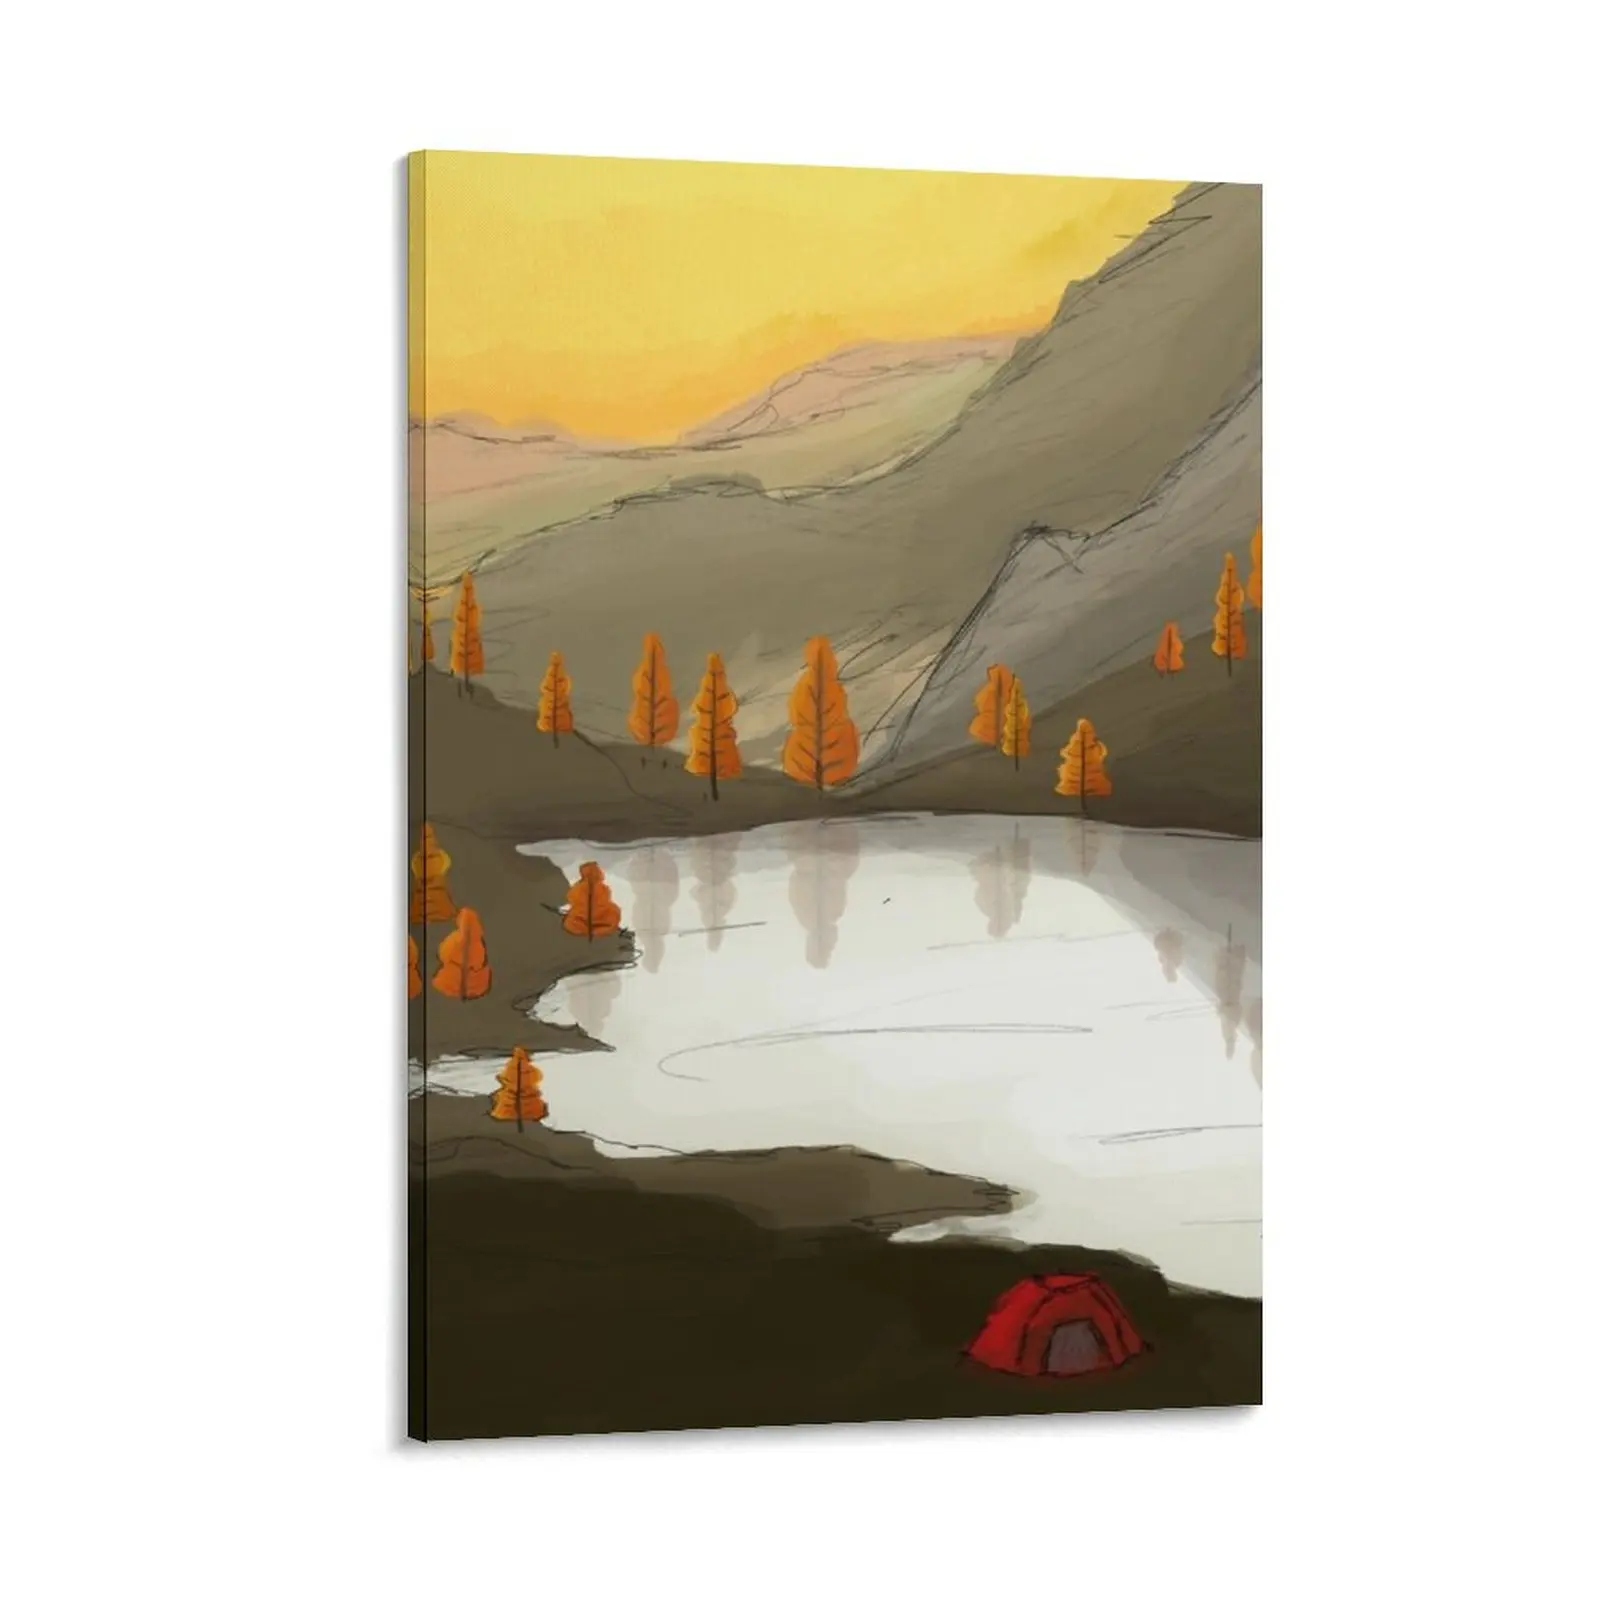 

Peaceful Camping Mountain Lake Nature Scene Art Canvas Painting Decorative prints wall painting canvas wall art